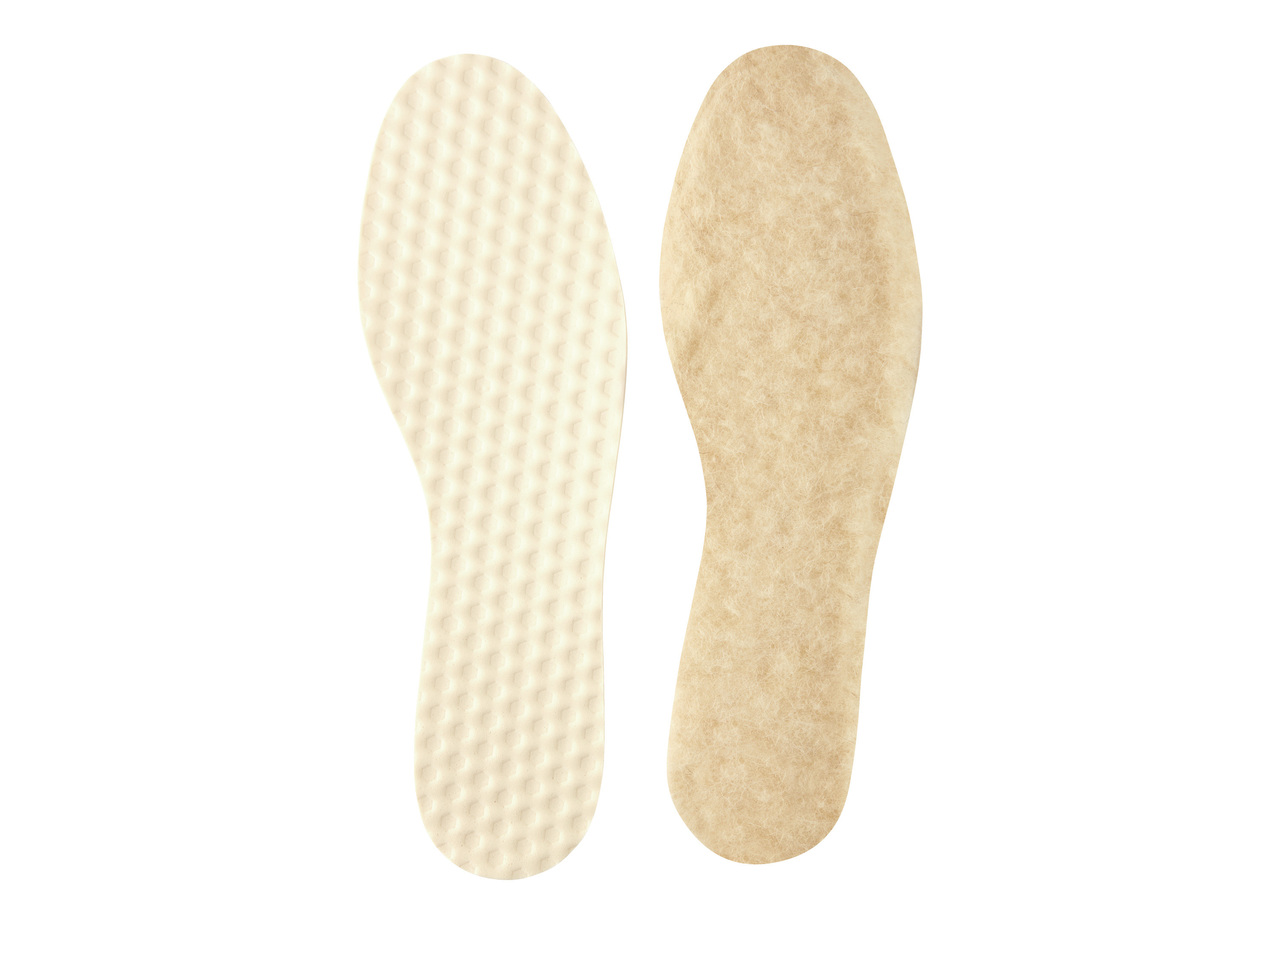 Unisex Thermal Insoles